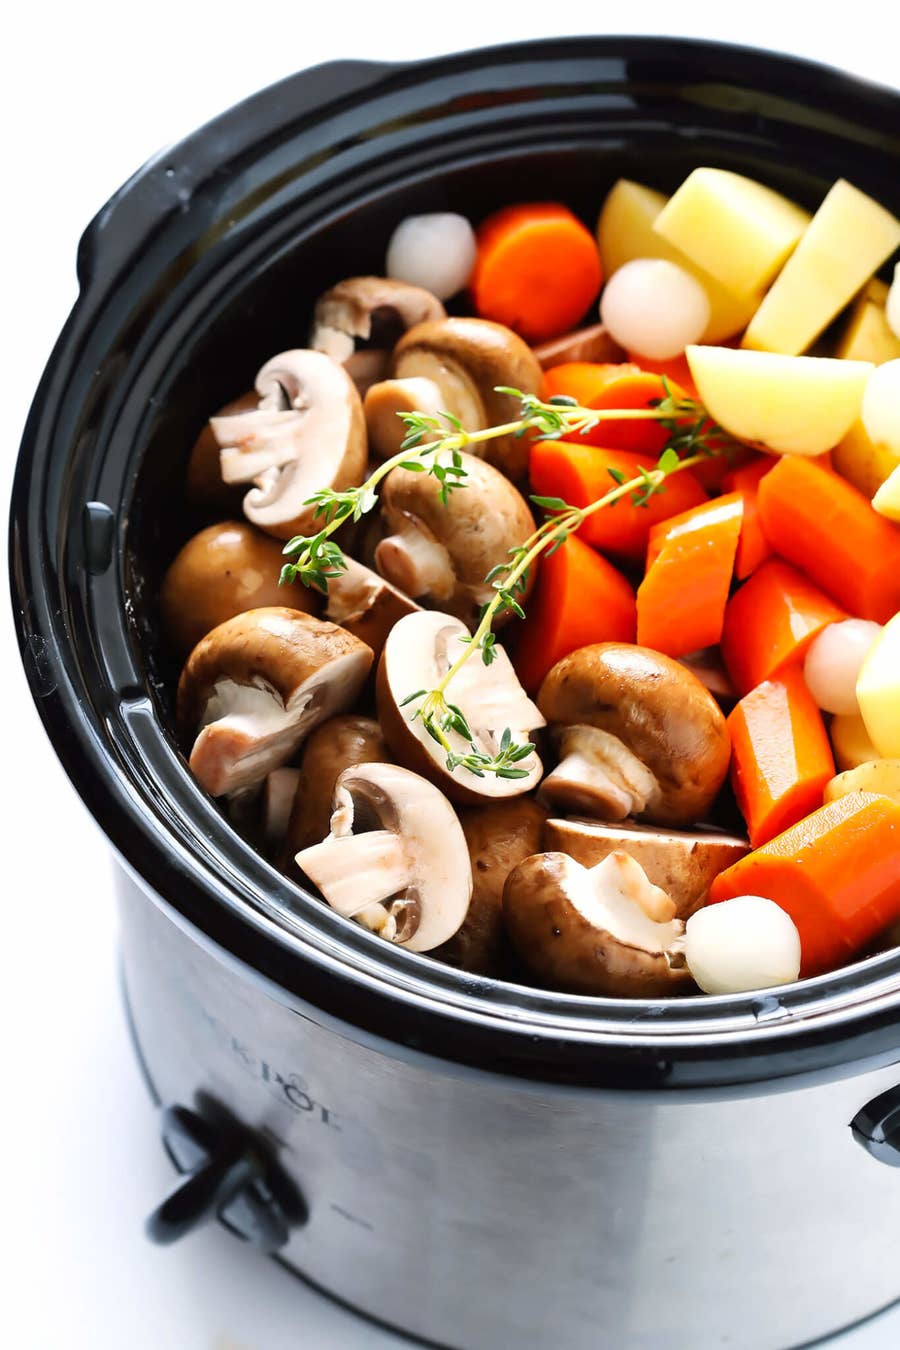 44 Easy Instant Pot Recipes For Beginners Or New Cooks